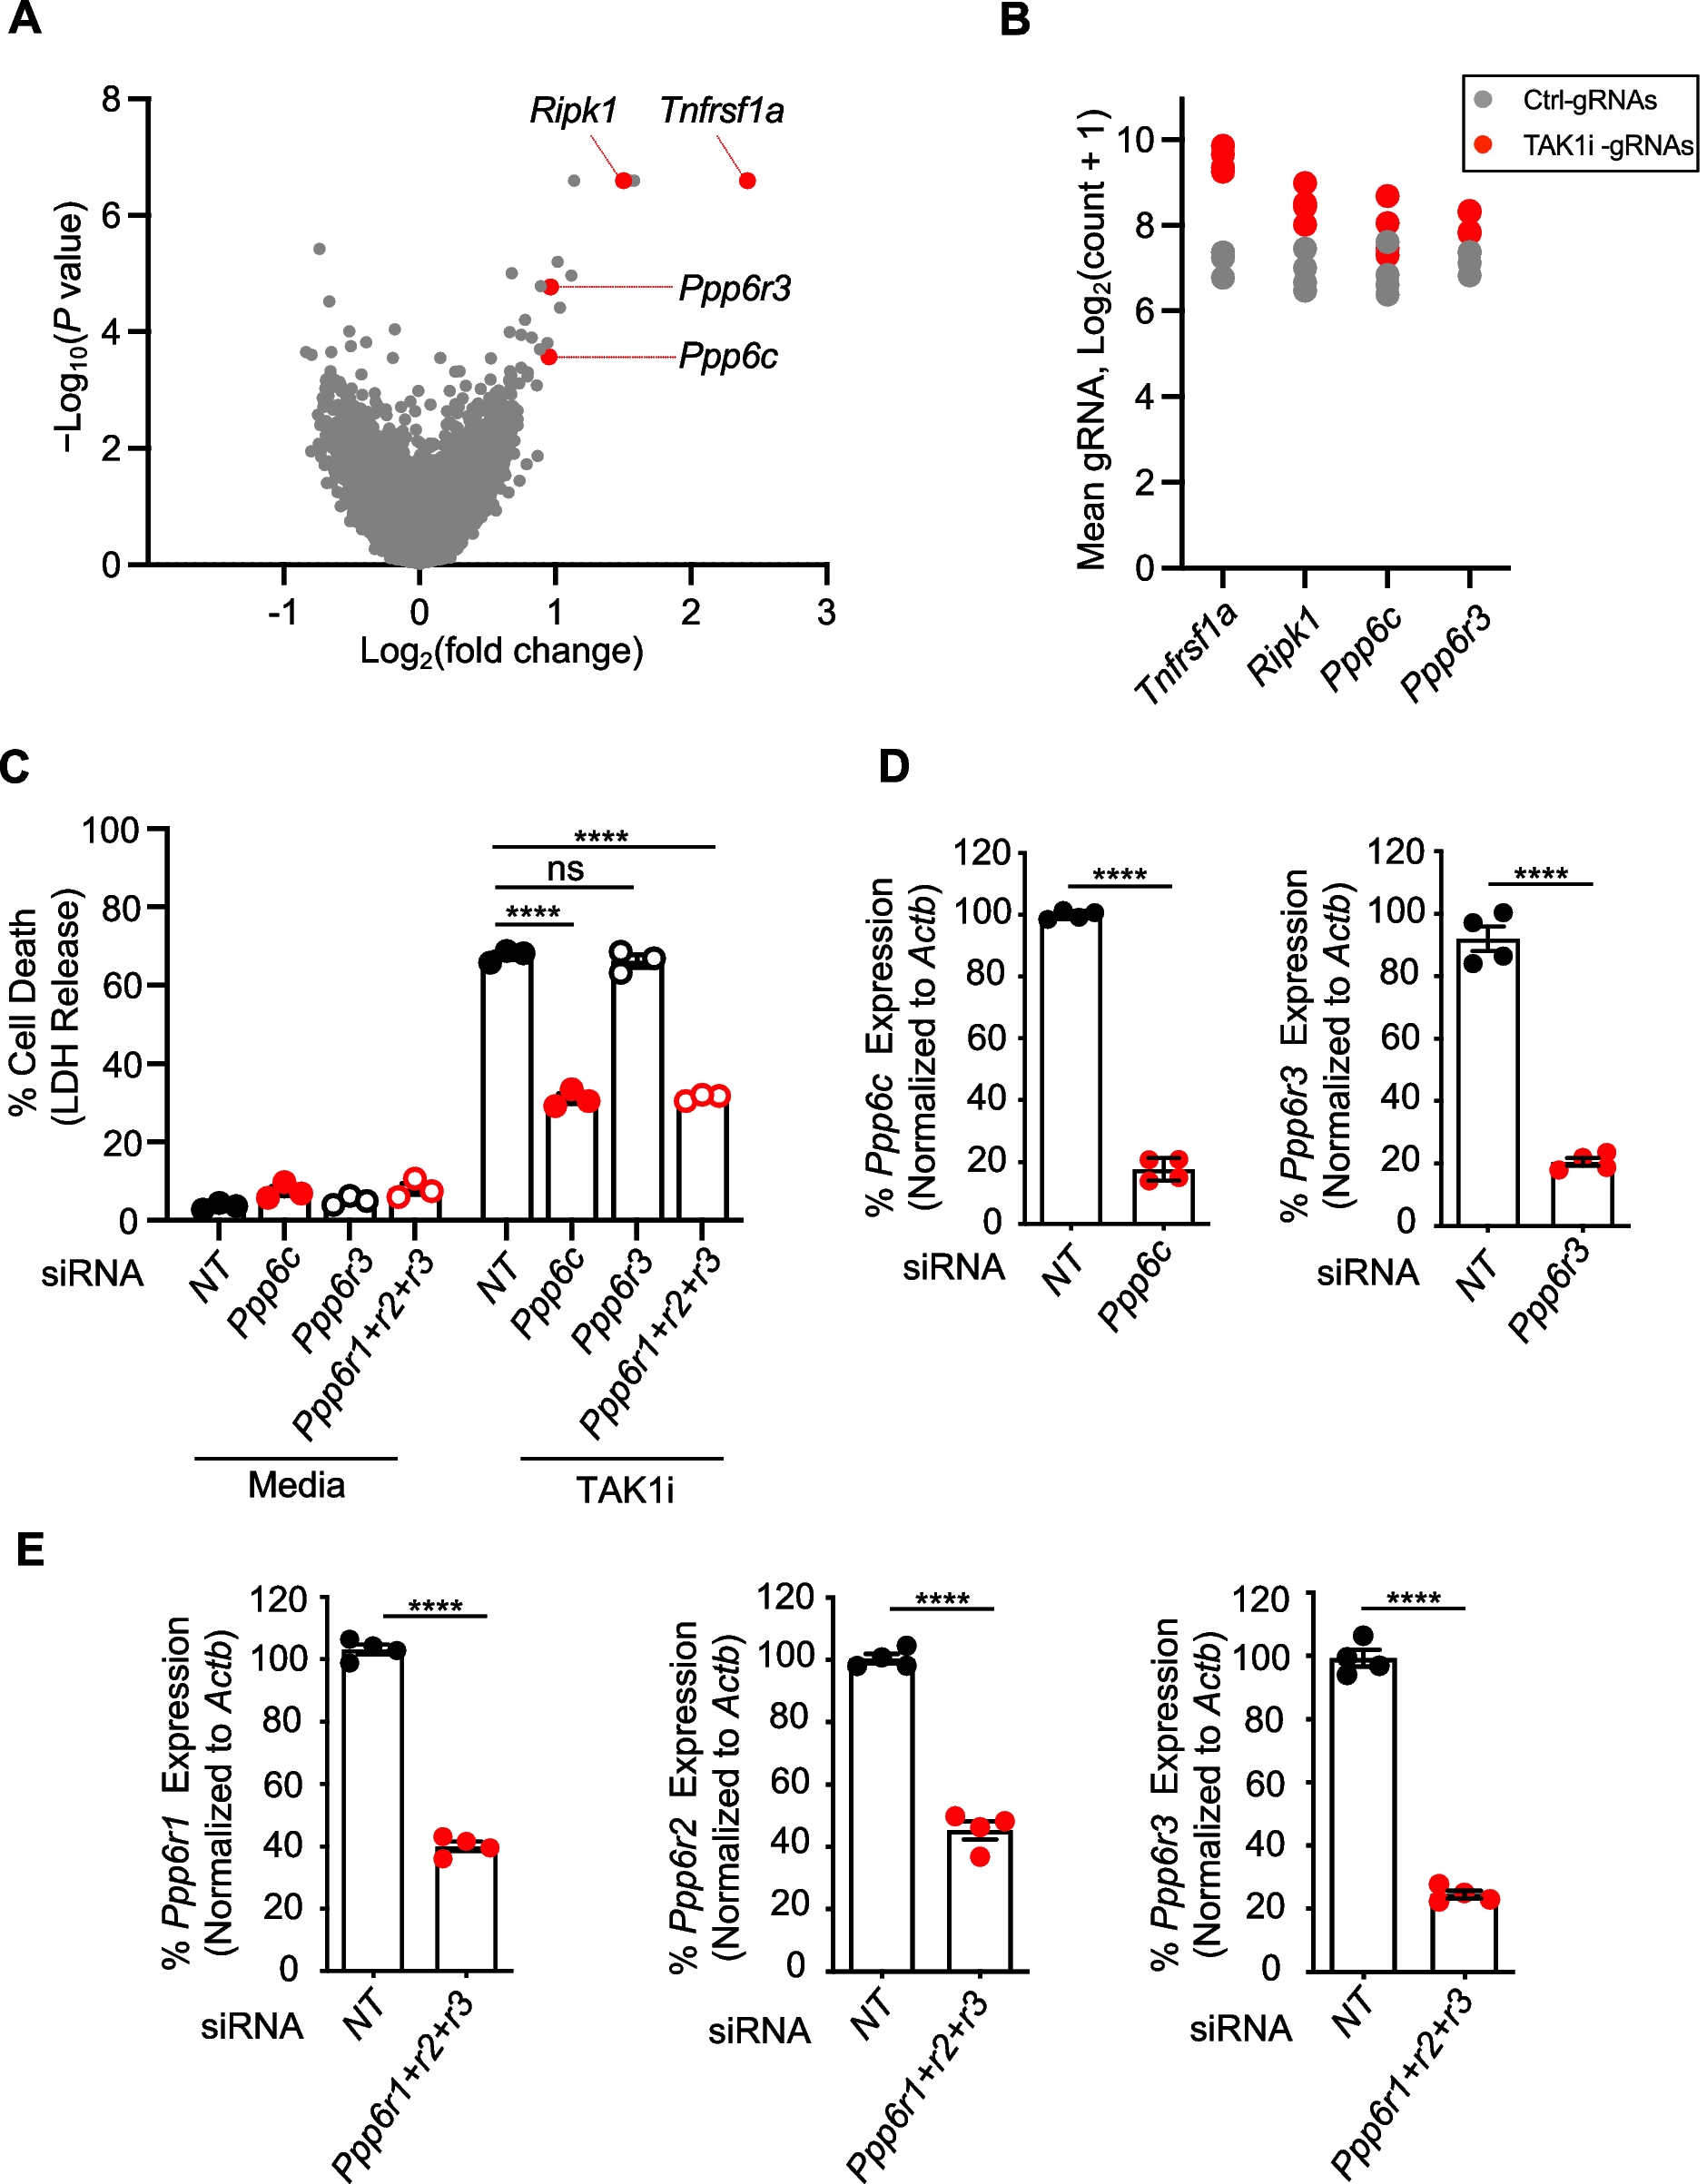 The protein phosphatase PP6 promotes RIPK1-dependent PANoptosis